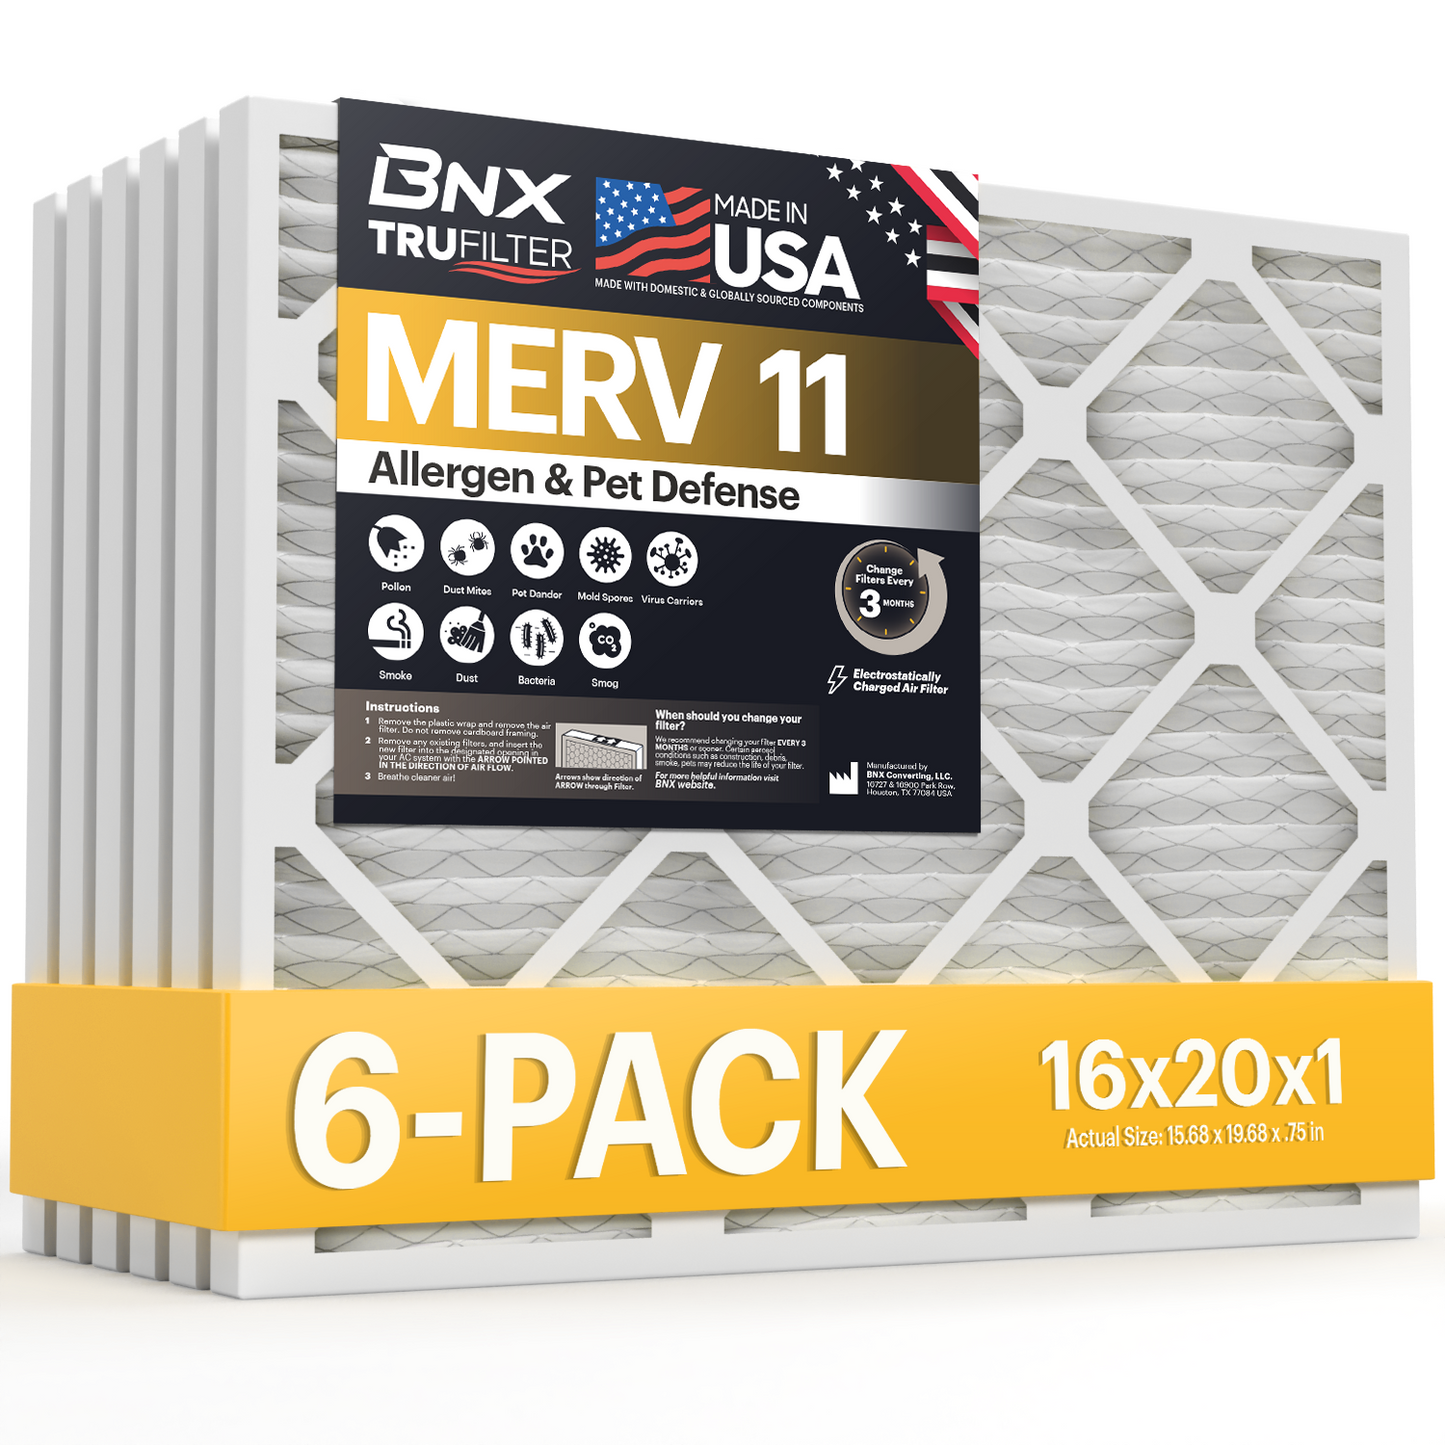 BNX TruFilter 16x20x1 Air Filter MERV 11 (6-Pack) - MADE IN USA - Allergen Defense Electrostatic Pleated Air Conditioner HVAC AC Furnace Filters for Allergies, Dust, Pet, Smoke, Allergy MPR 1200 FPR 7